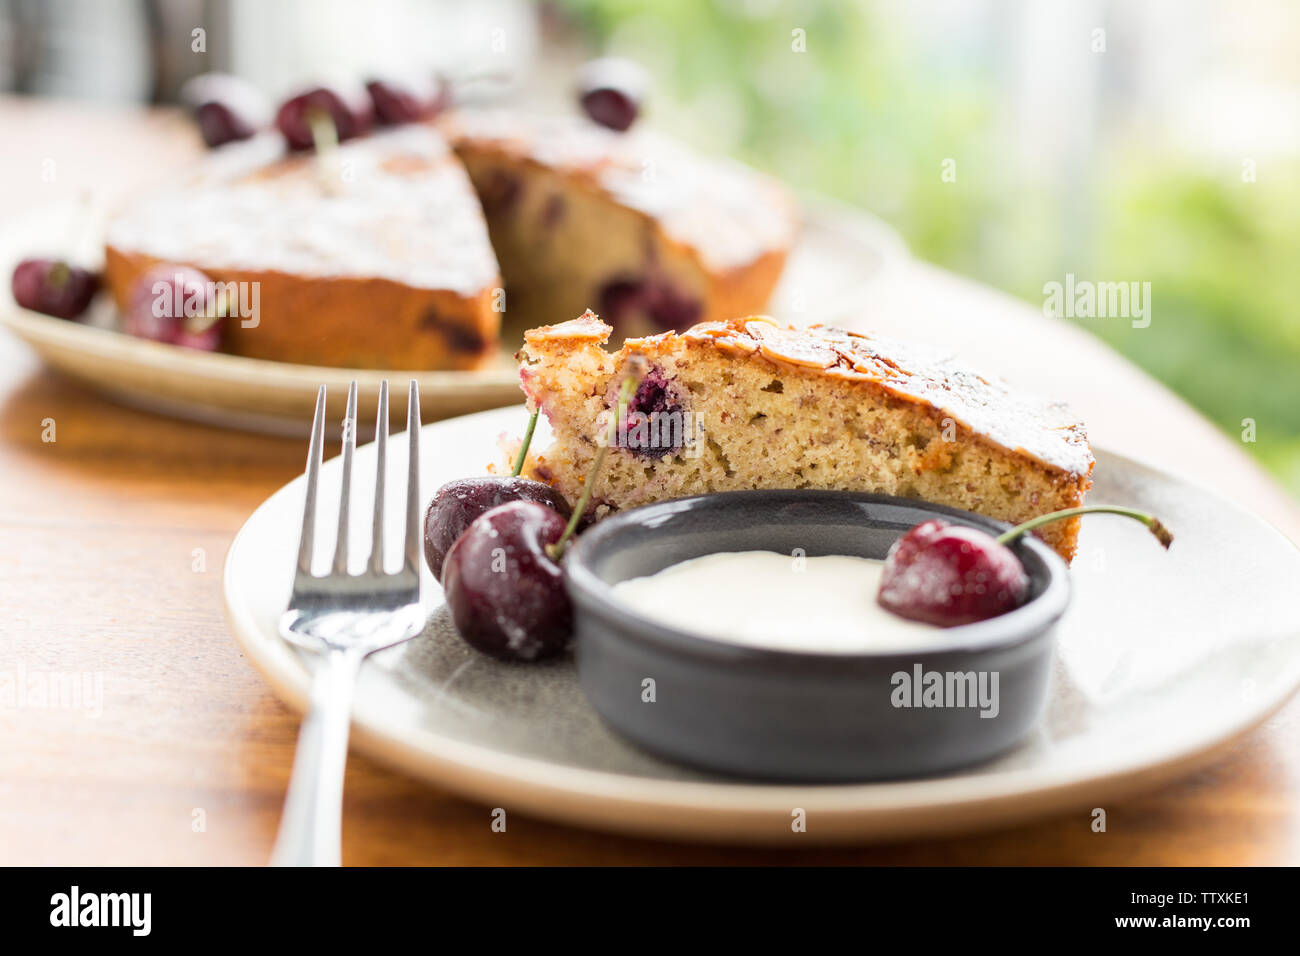 Single slice of cherry cake with icing dusting, cream and cherries on the side, with the rest of the cake in the background Stock Photo